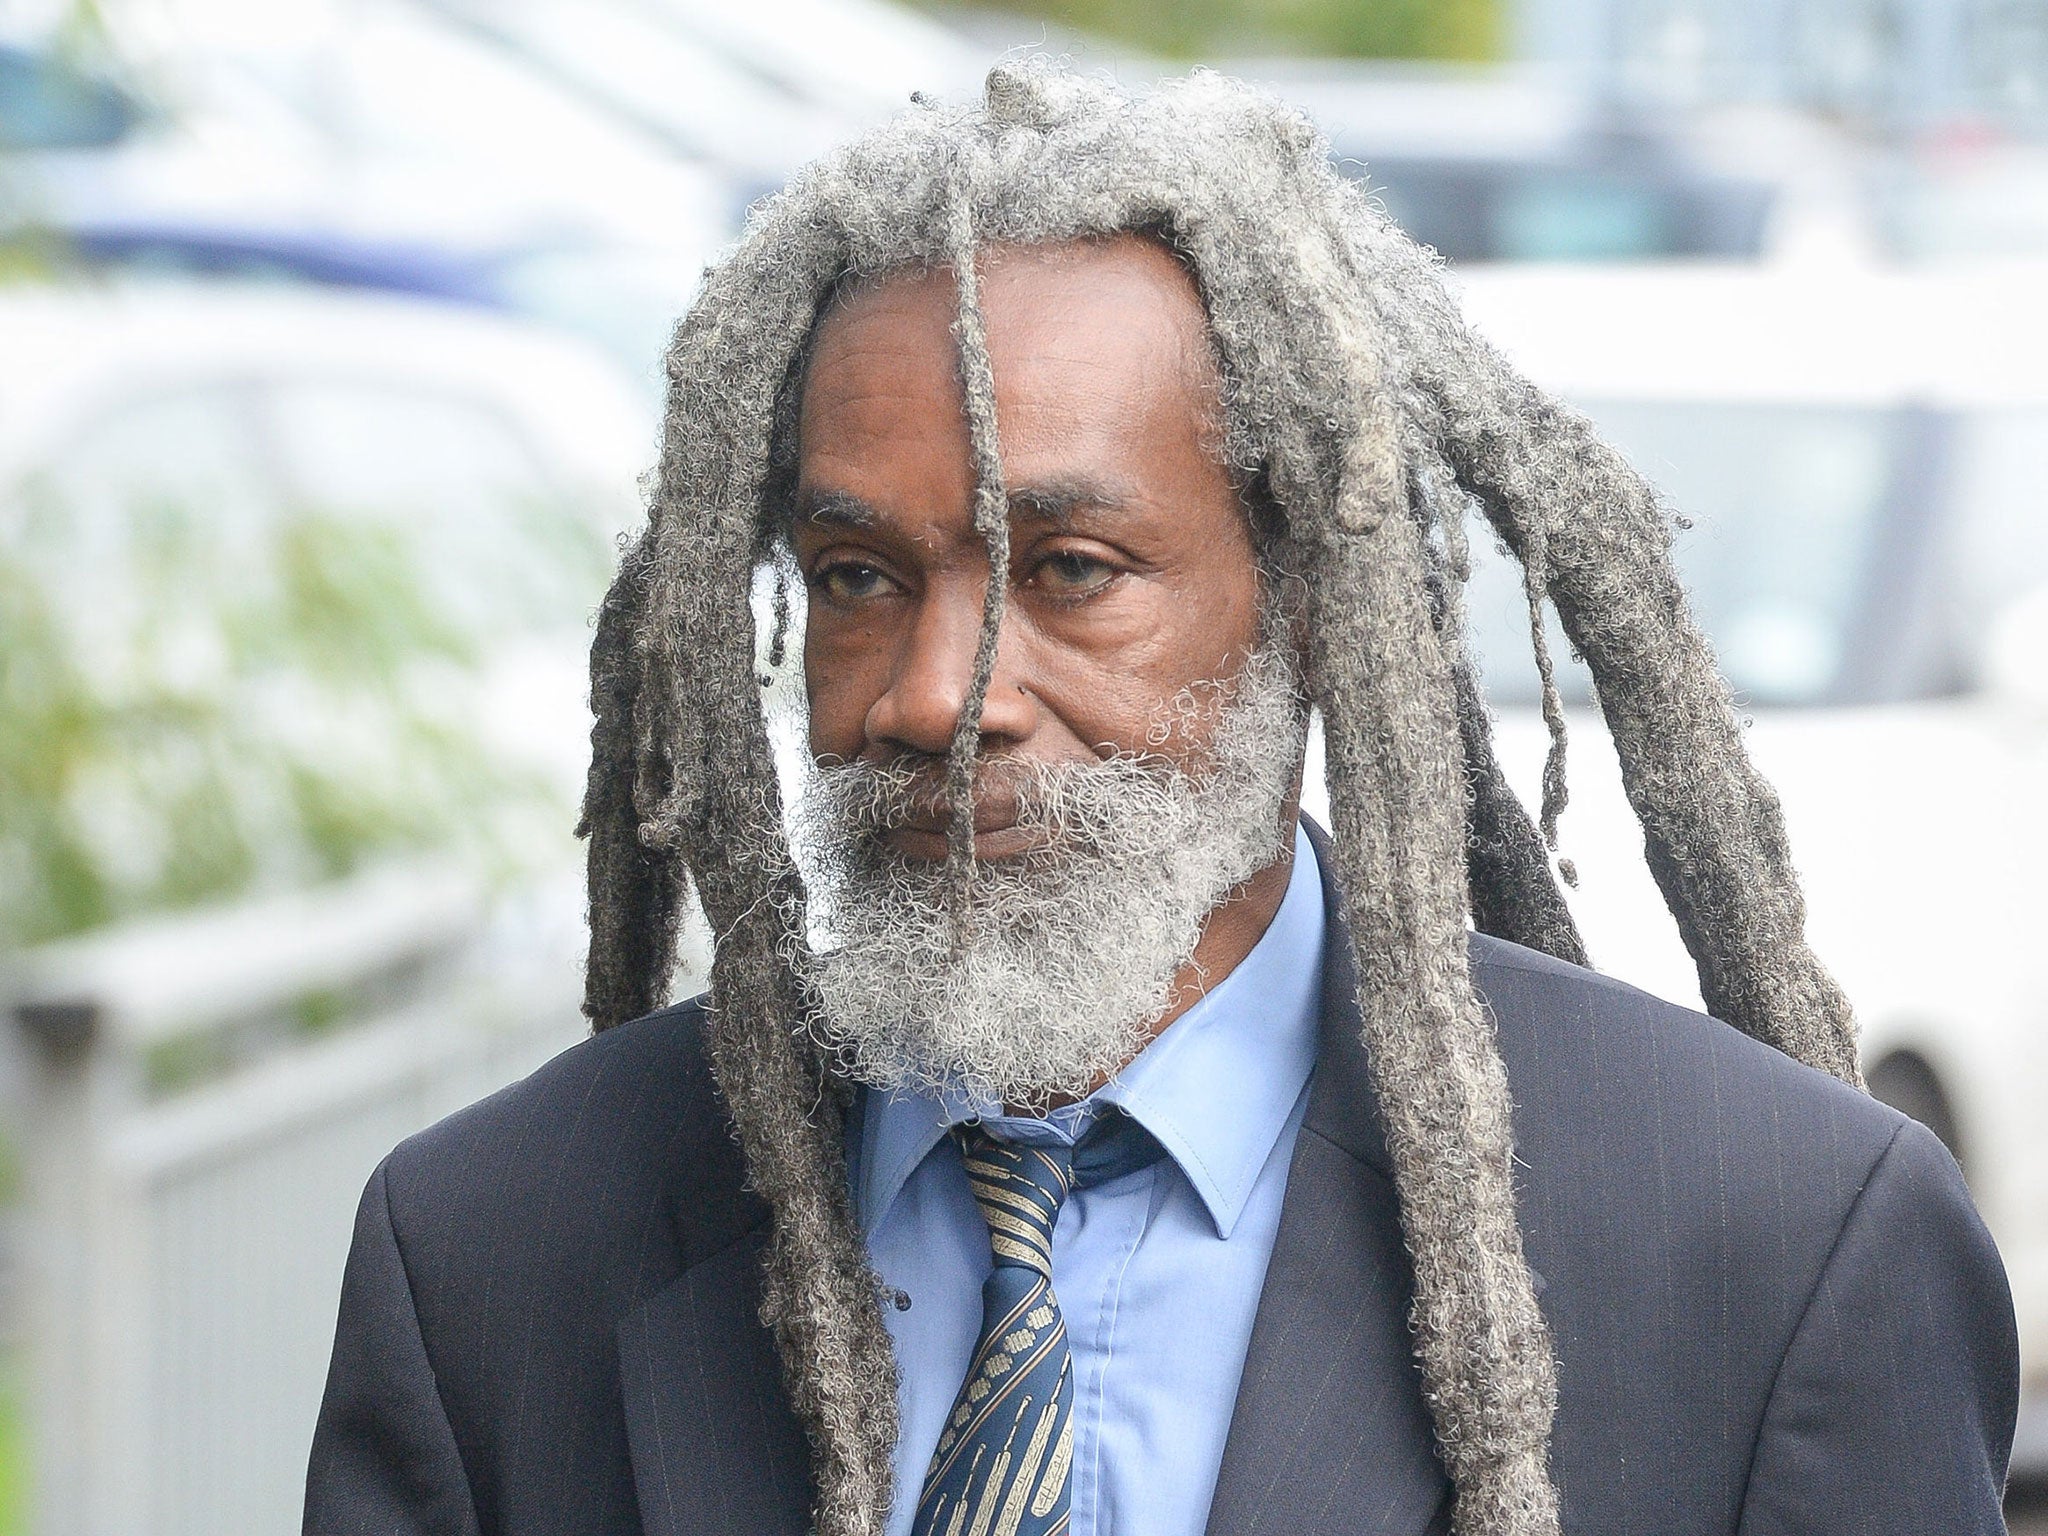 Judah Adunbi, a police race relations adviser who was tasered in the face by one of the force's own officers, told the court he had frequently been mistaken for a suspect